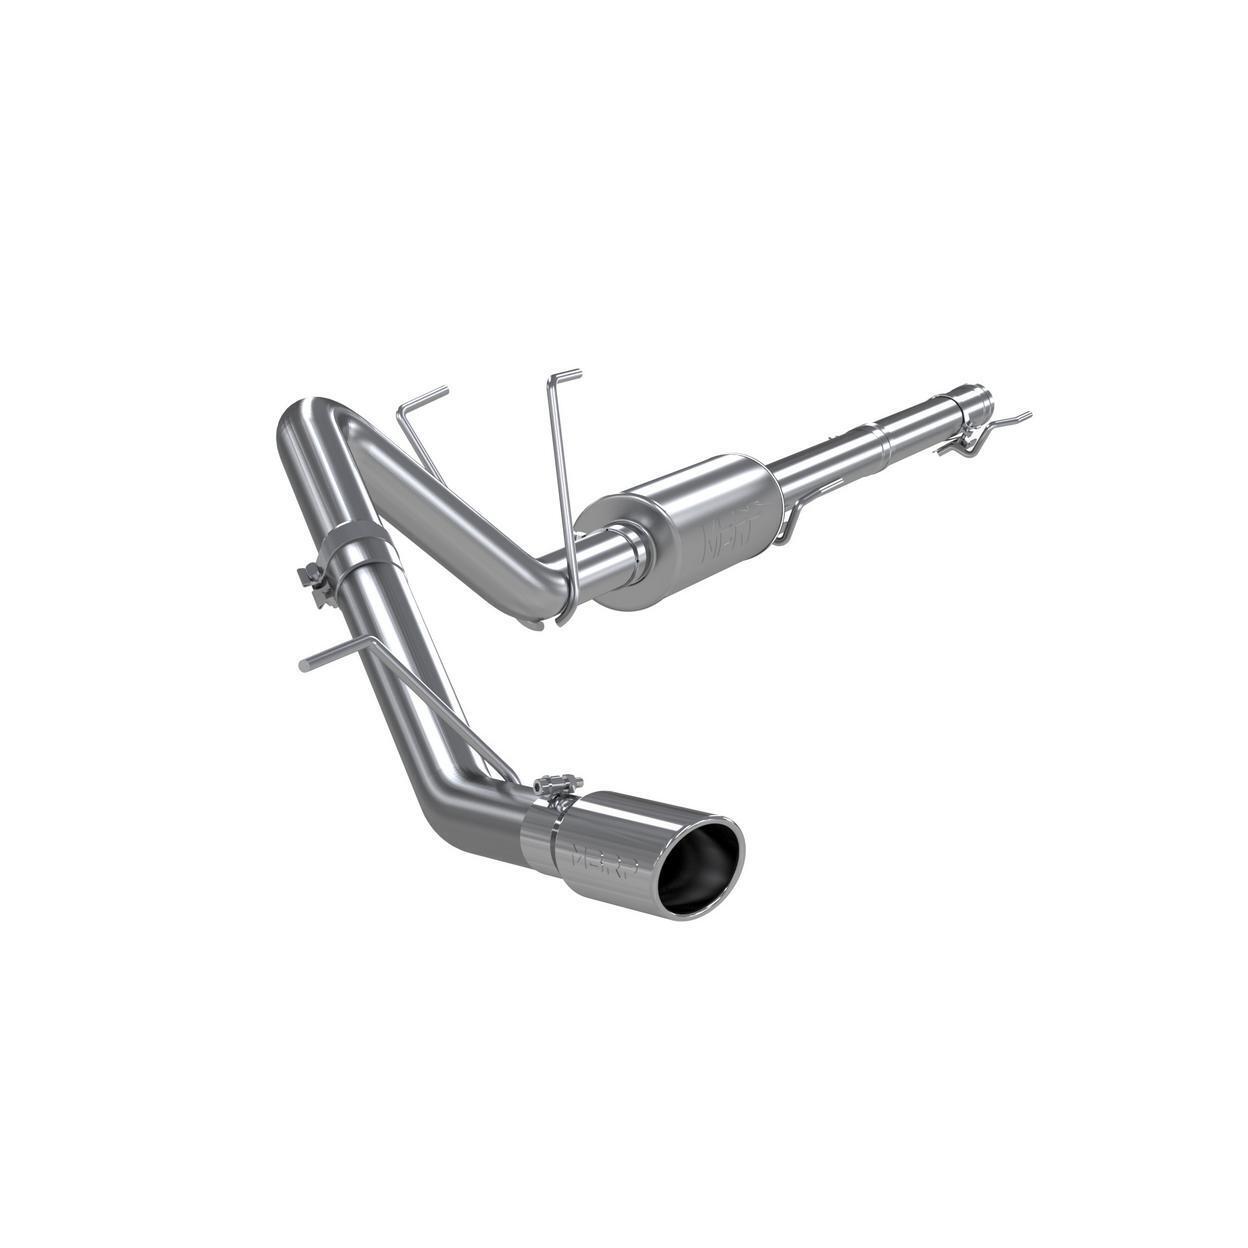 MBRP S5142409-ZL Exhaust System Kit Fits 2018 Ram 1500 Lone Star